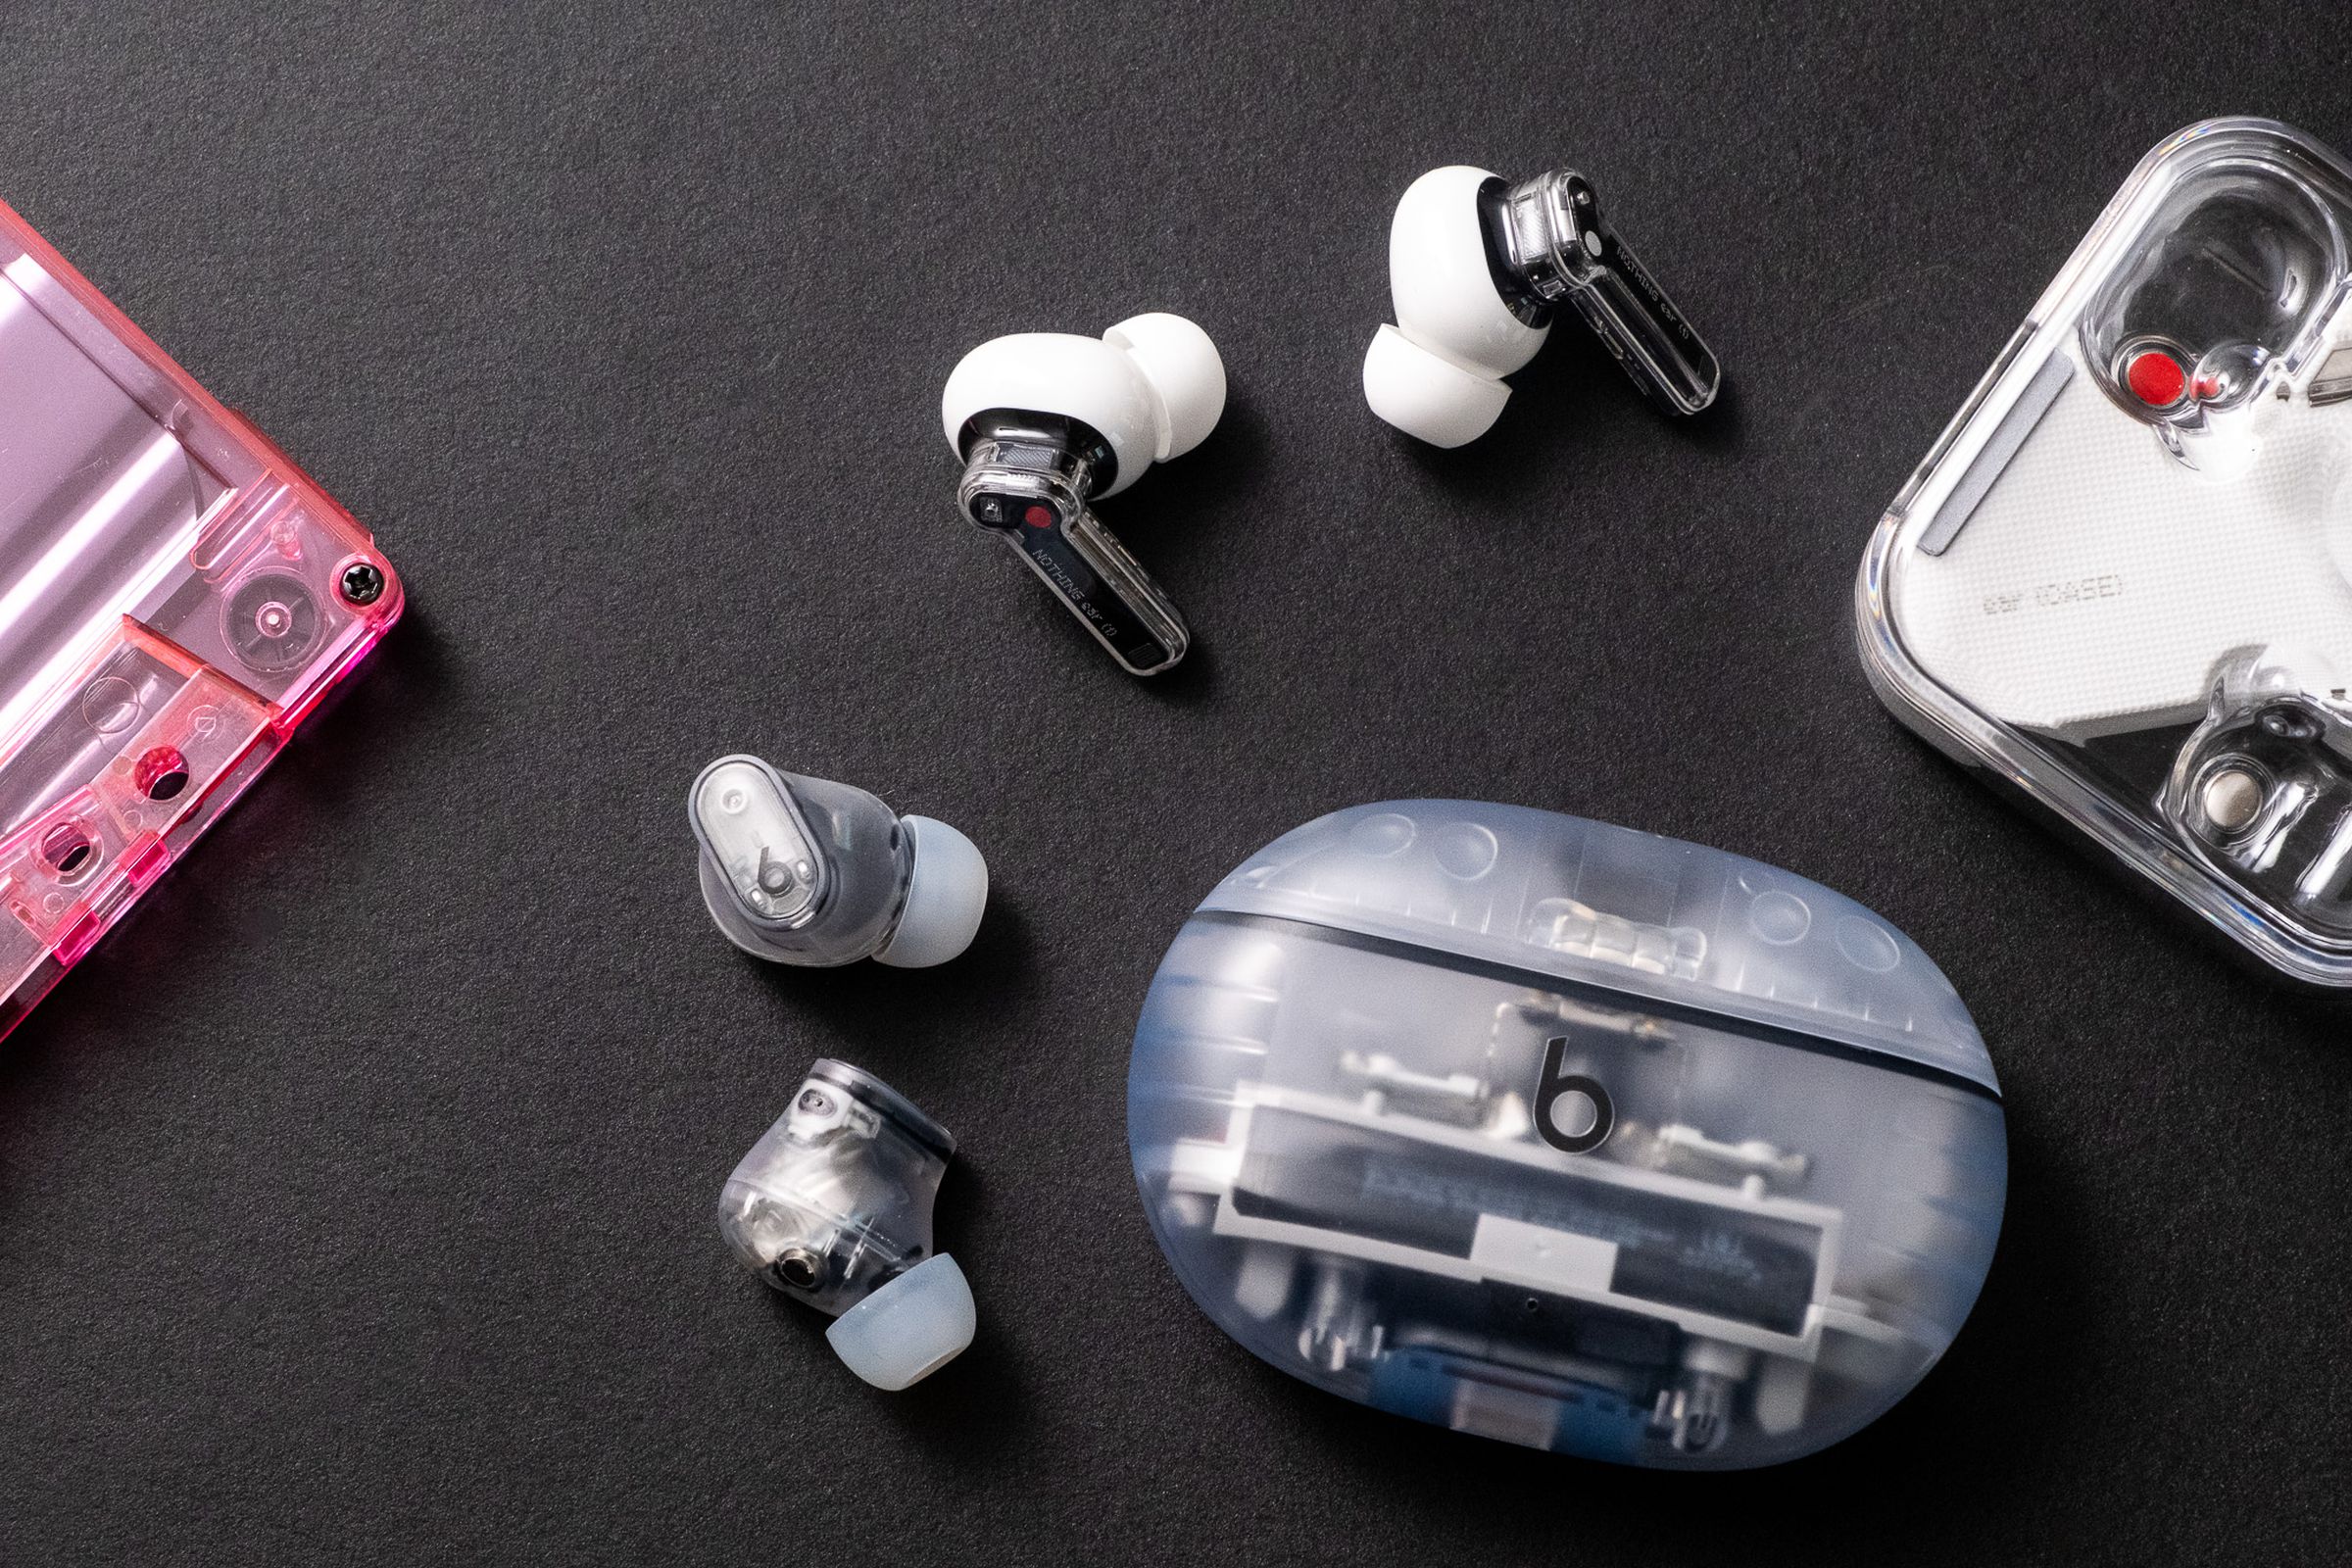 A photo of Beats’ translucent Studio Buds Plus earbuds.